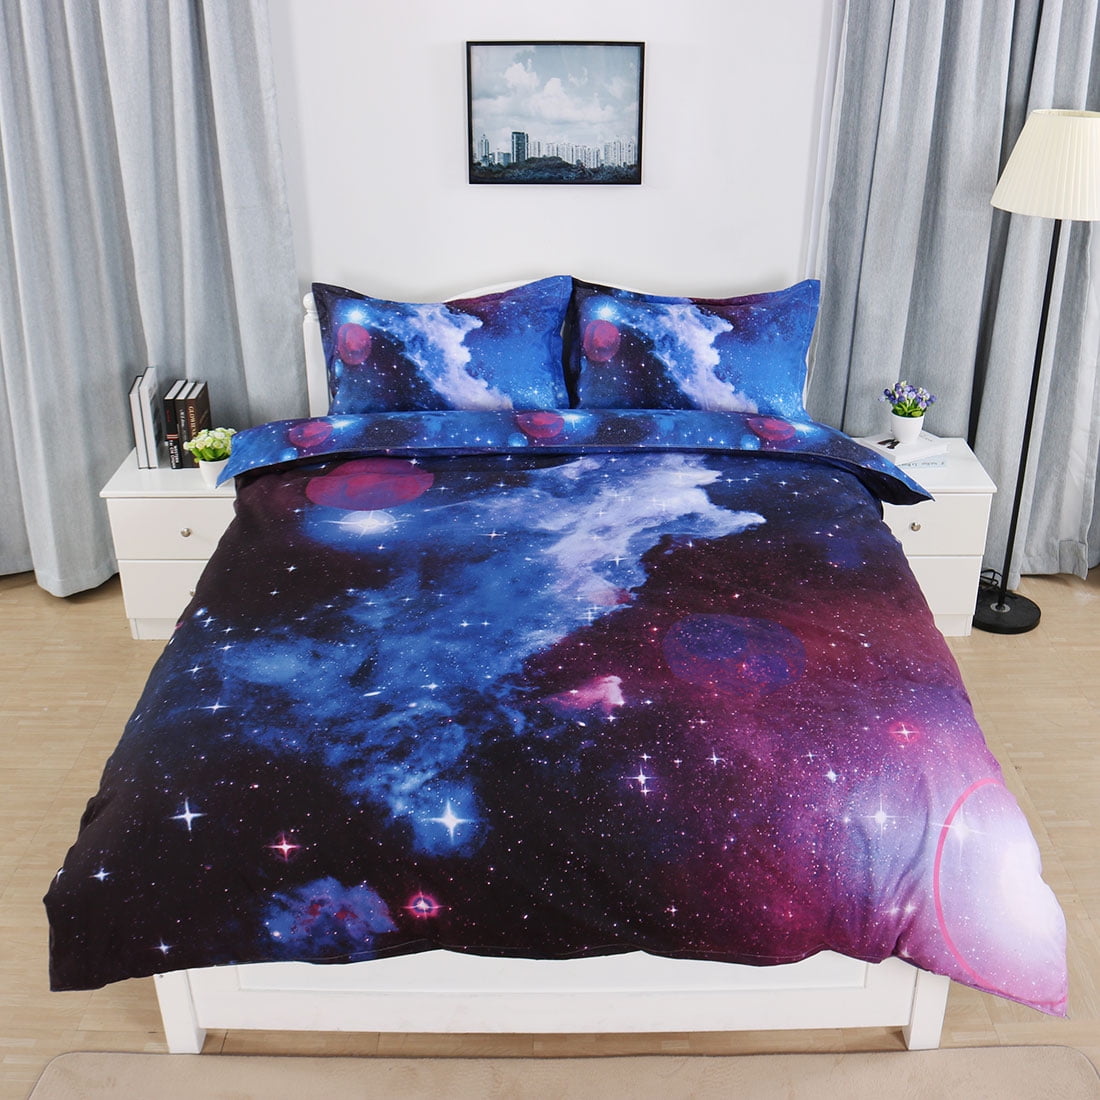 WINLIFE Galaxy Outer Space Print Duvet Cover Full 3-Pieces Reversible Blue/Purple Starry Sky Bedding Sets Ultra Soft Microfiber Bed Set with Hidden Zipper & Corner Ties Full